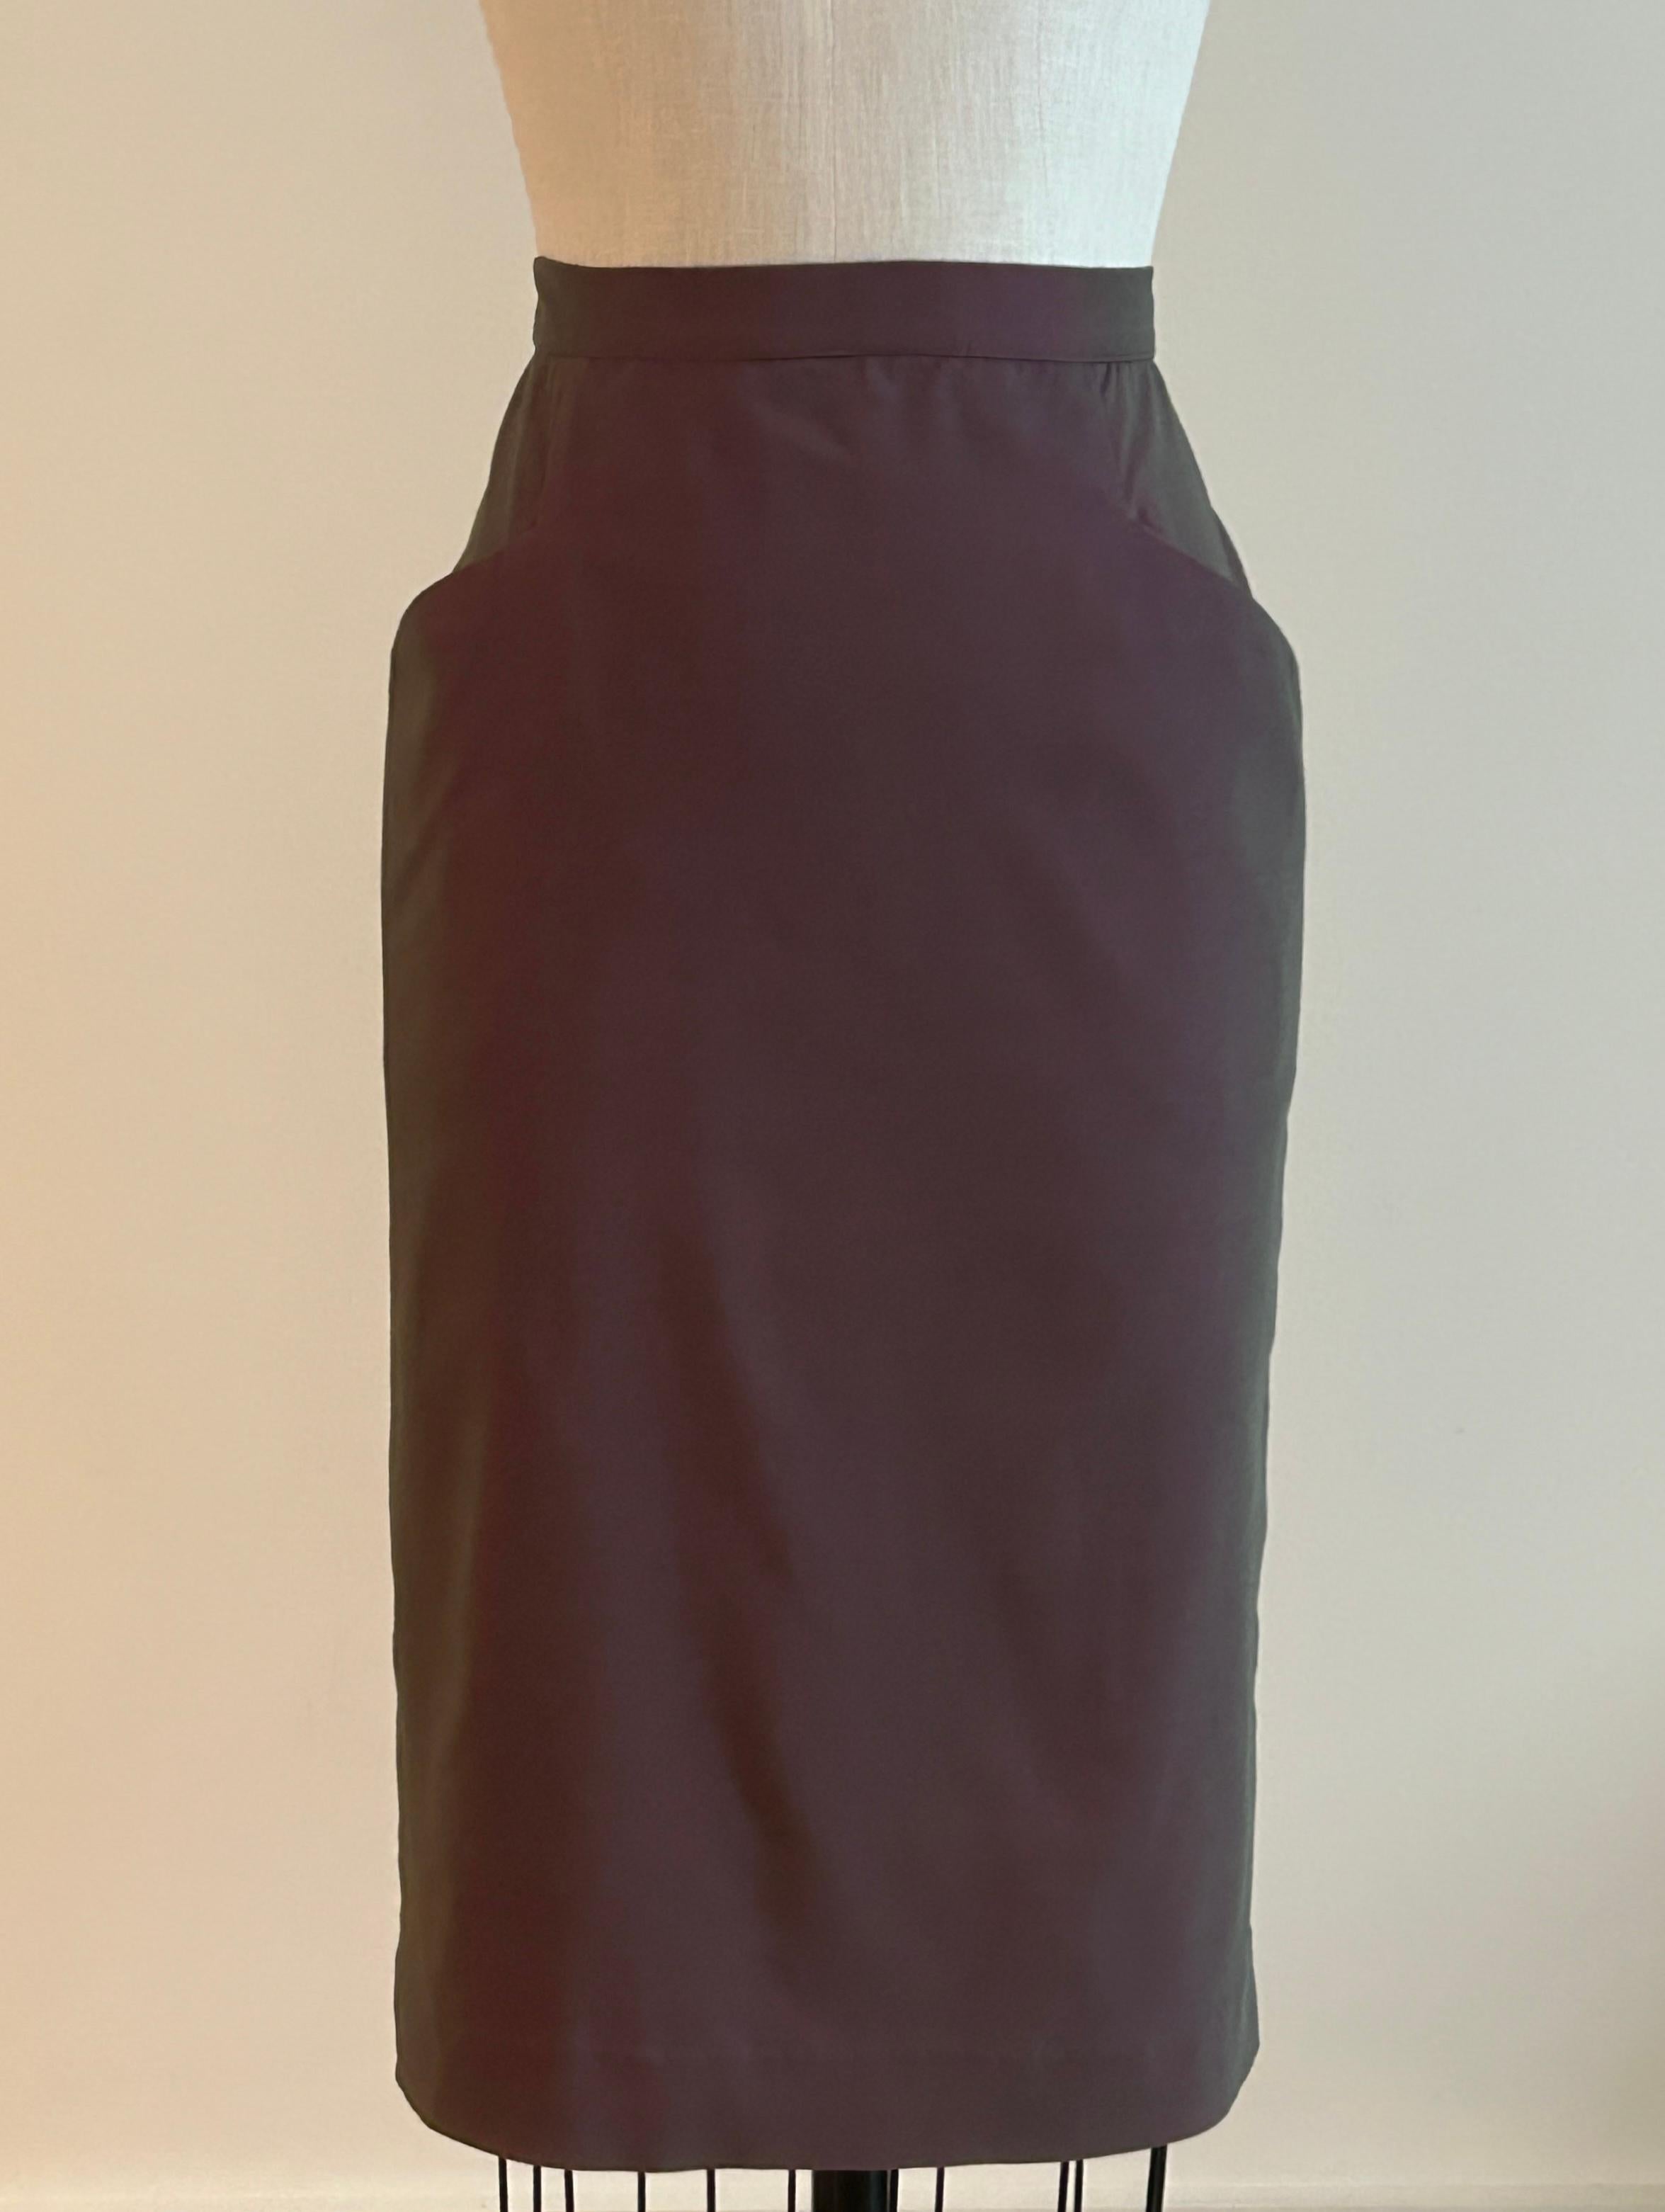 Vintage Alexander McQueen pencil skirt in an interwoven red and black textile that almost has a slight irredescent quality. The color reads like a grayish red. Pockets at front sides. Slit at center back. Back zip and button closure.

49% polyamide,